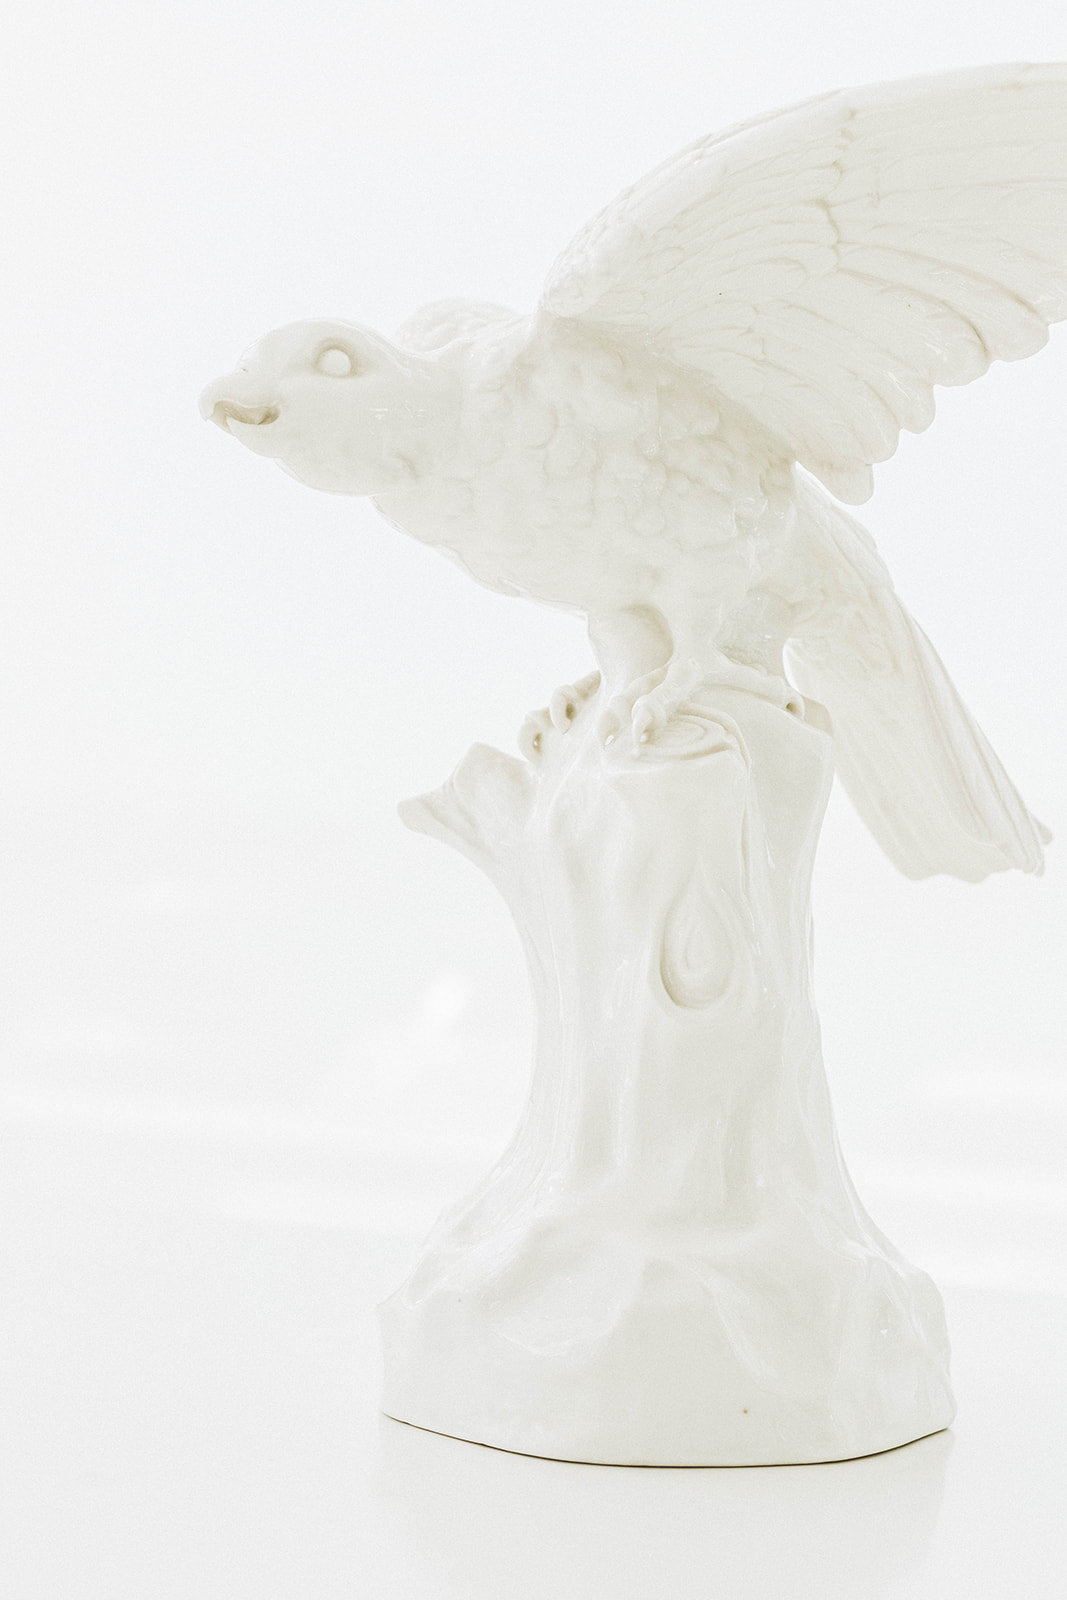 Nymphenberg Porcelain Parrot with Spread Wings